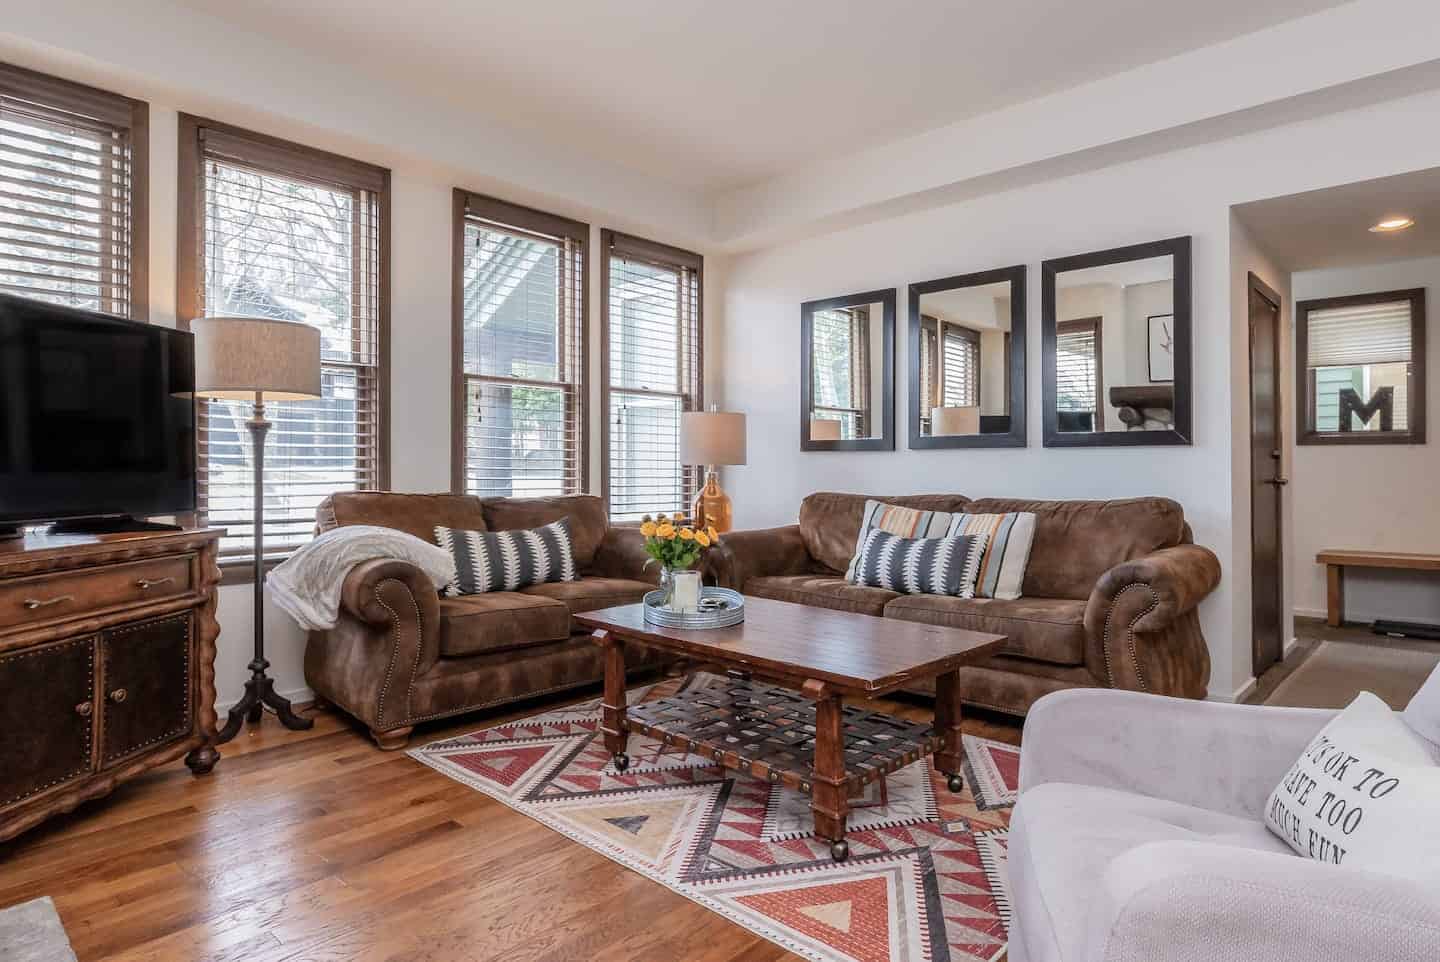 Image of Airbnb rental in Mammoth Lakes, California